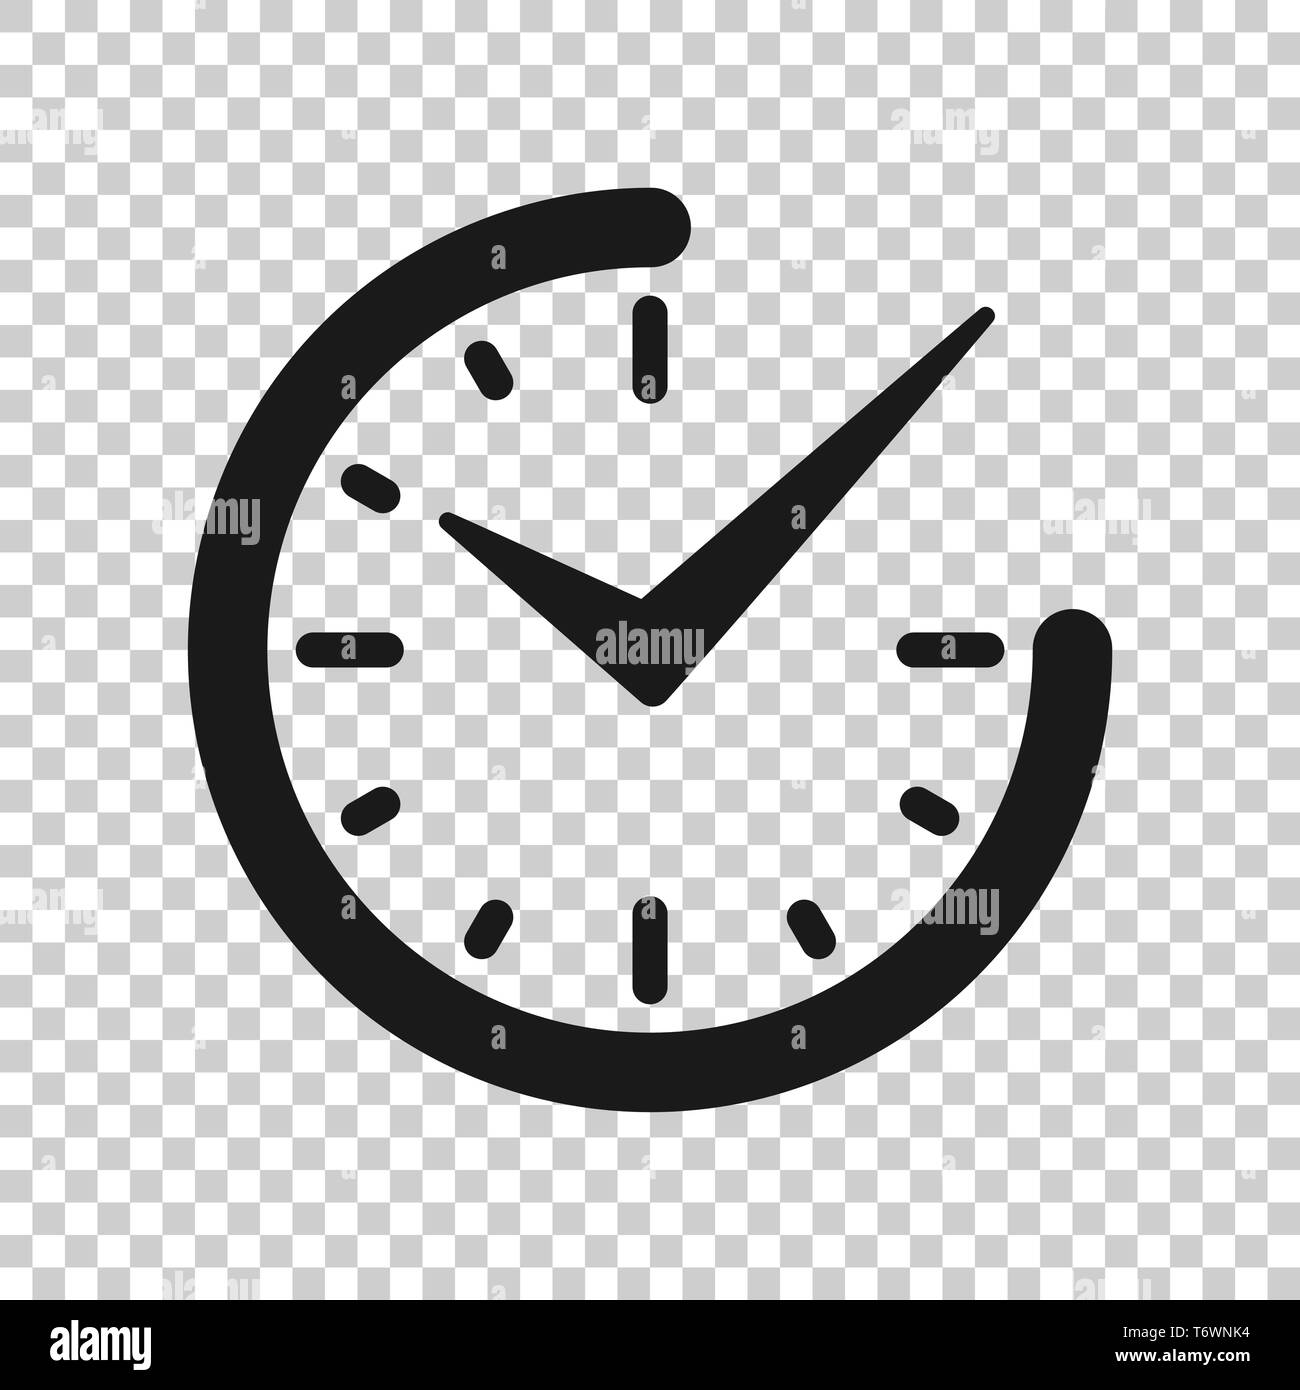 Real time icon in transparent style. Clock vector illustration on isolated background. Watch business concept. Stock Vector